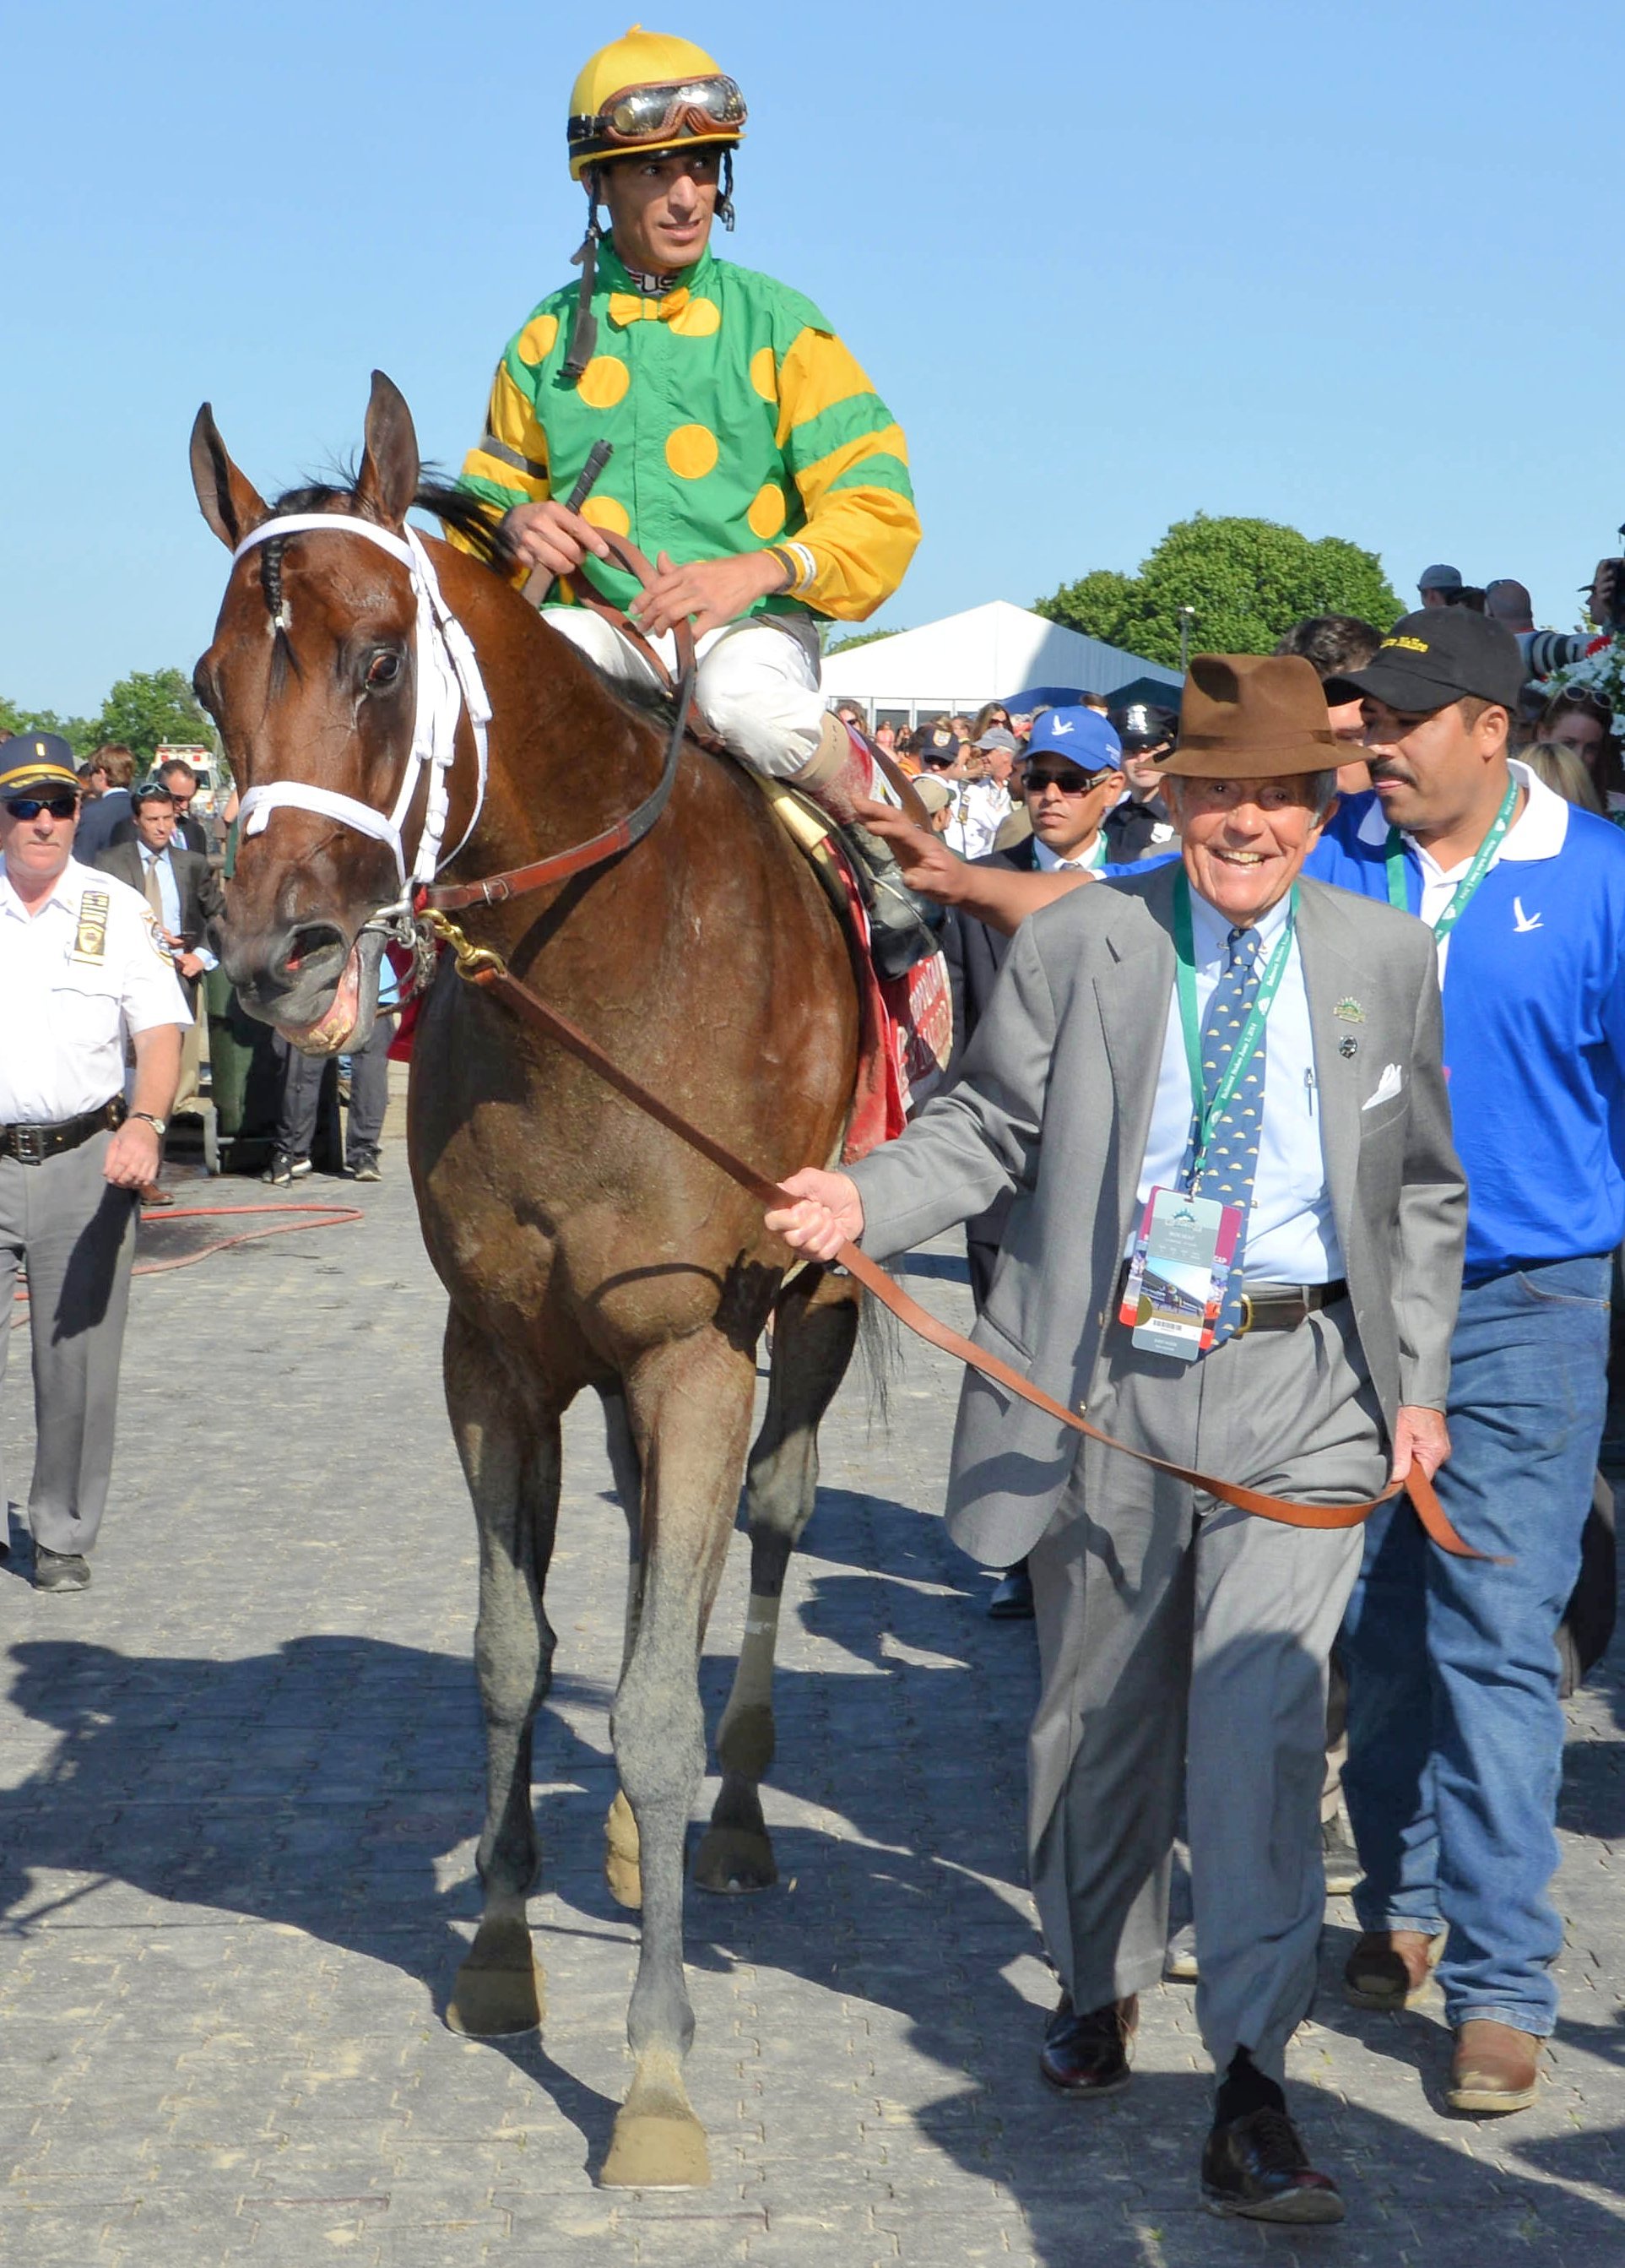 Cot Campbell leading in Palace Malice (John Velazquez up) after winning a race (NYRA)